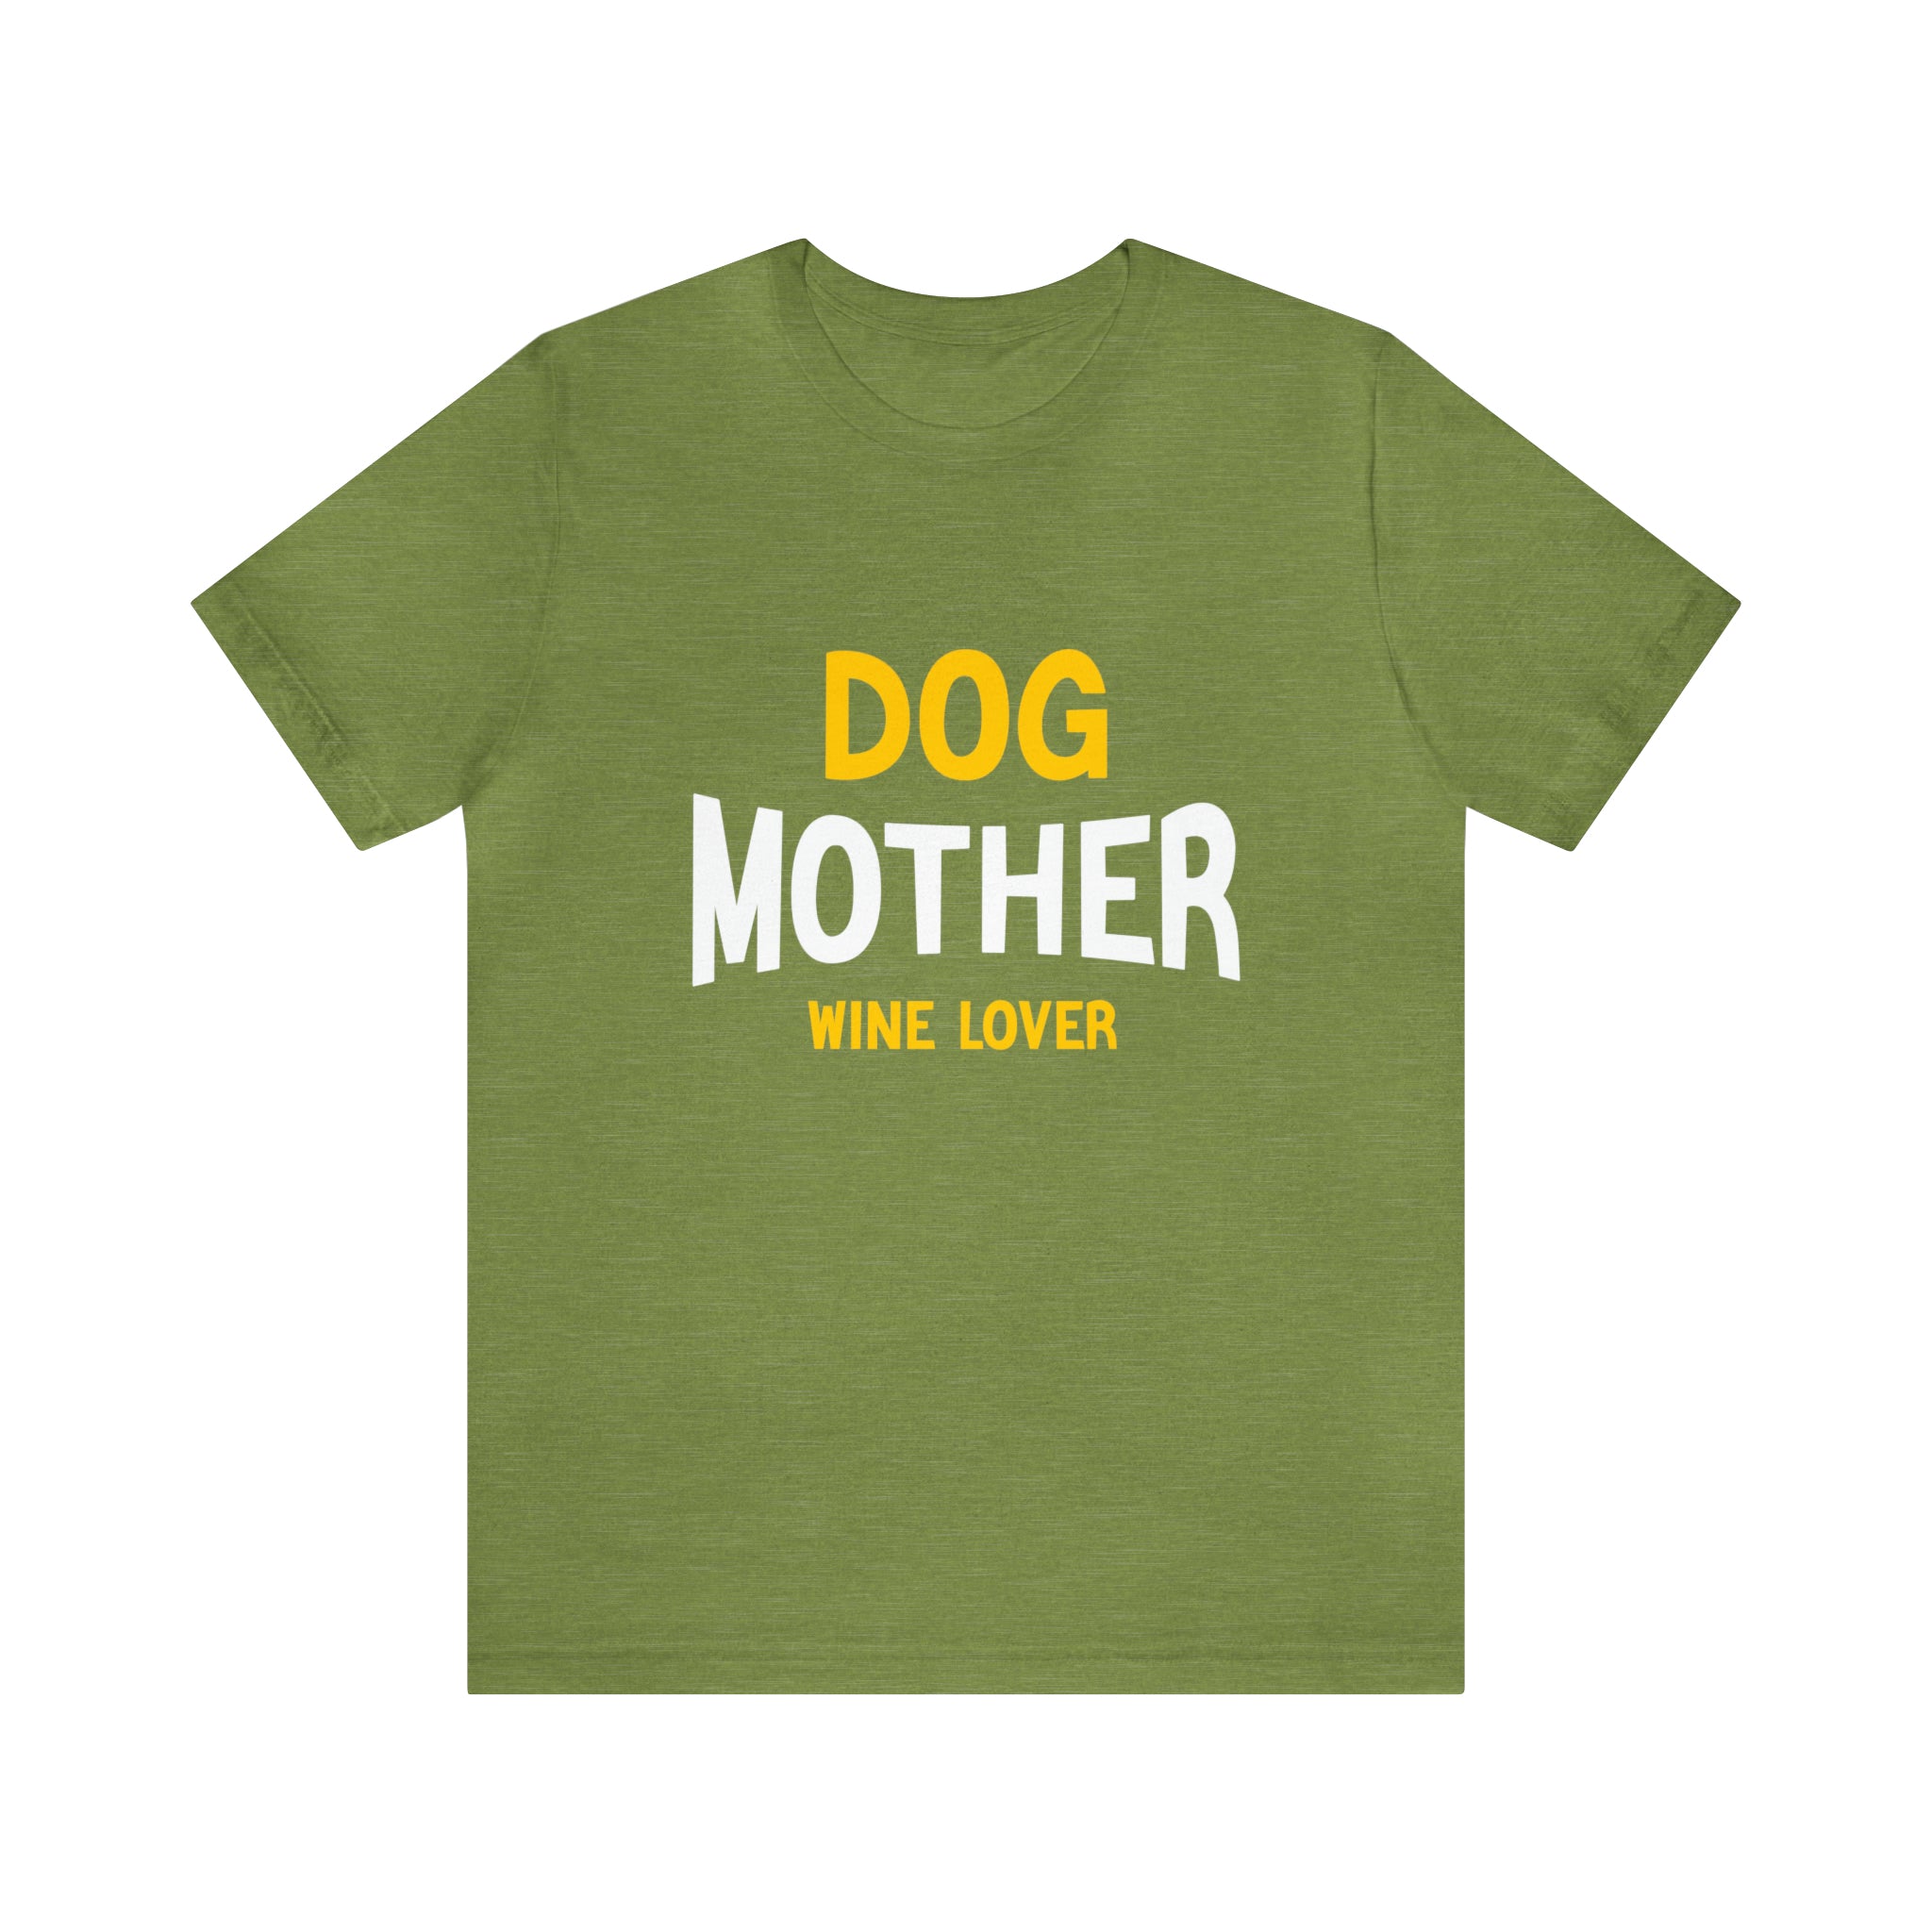 A Dog Mother Wine Lover T-Shirt that says dog mother wine lover.